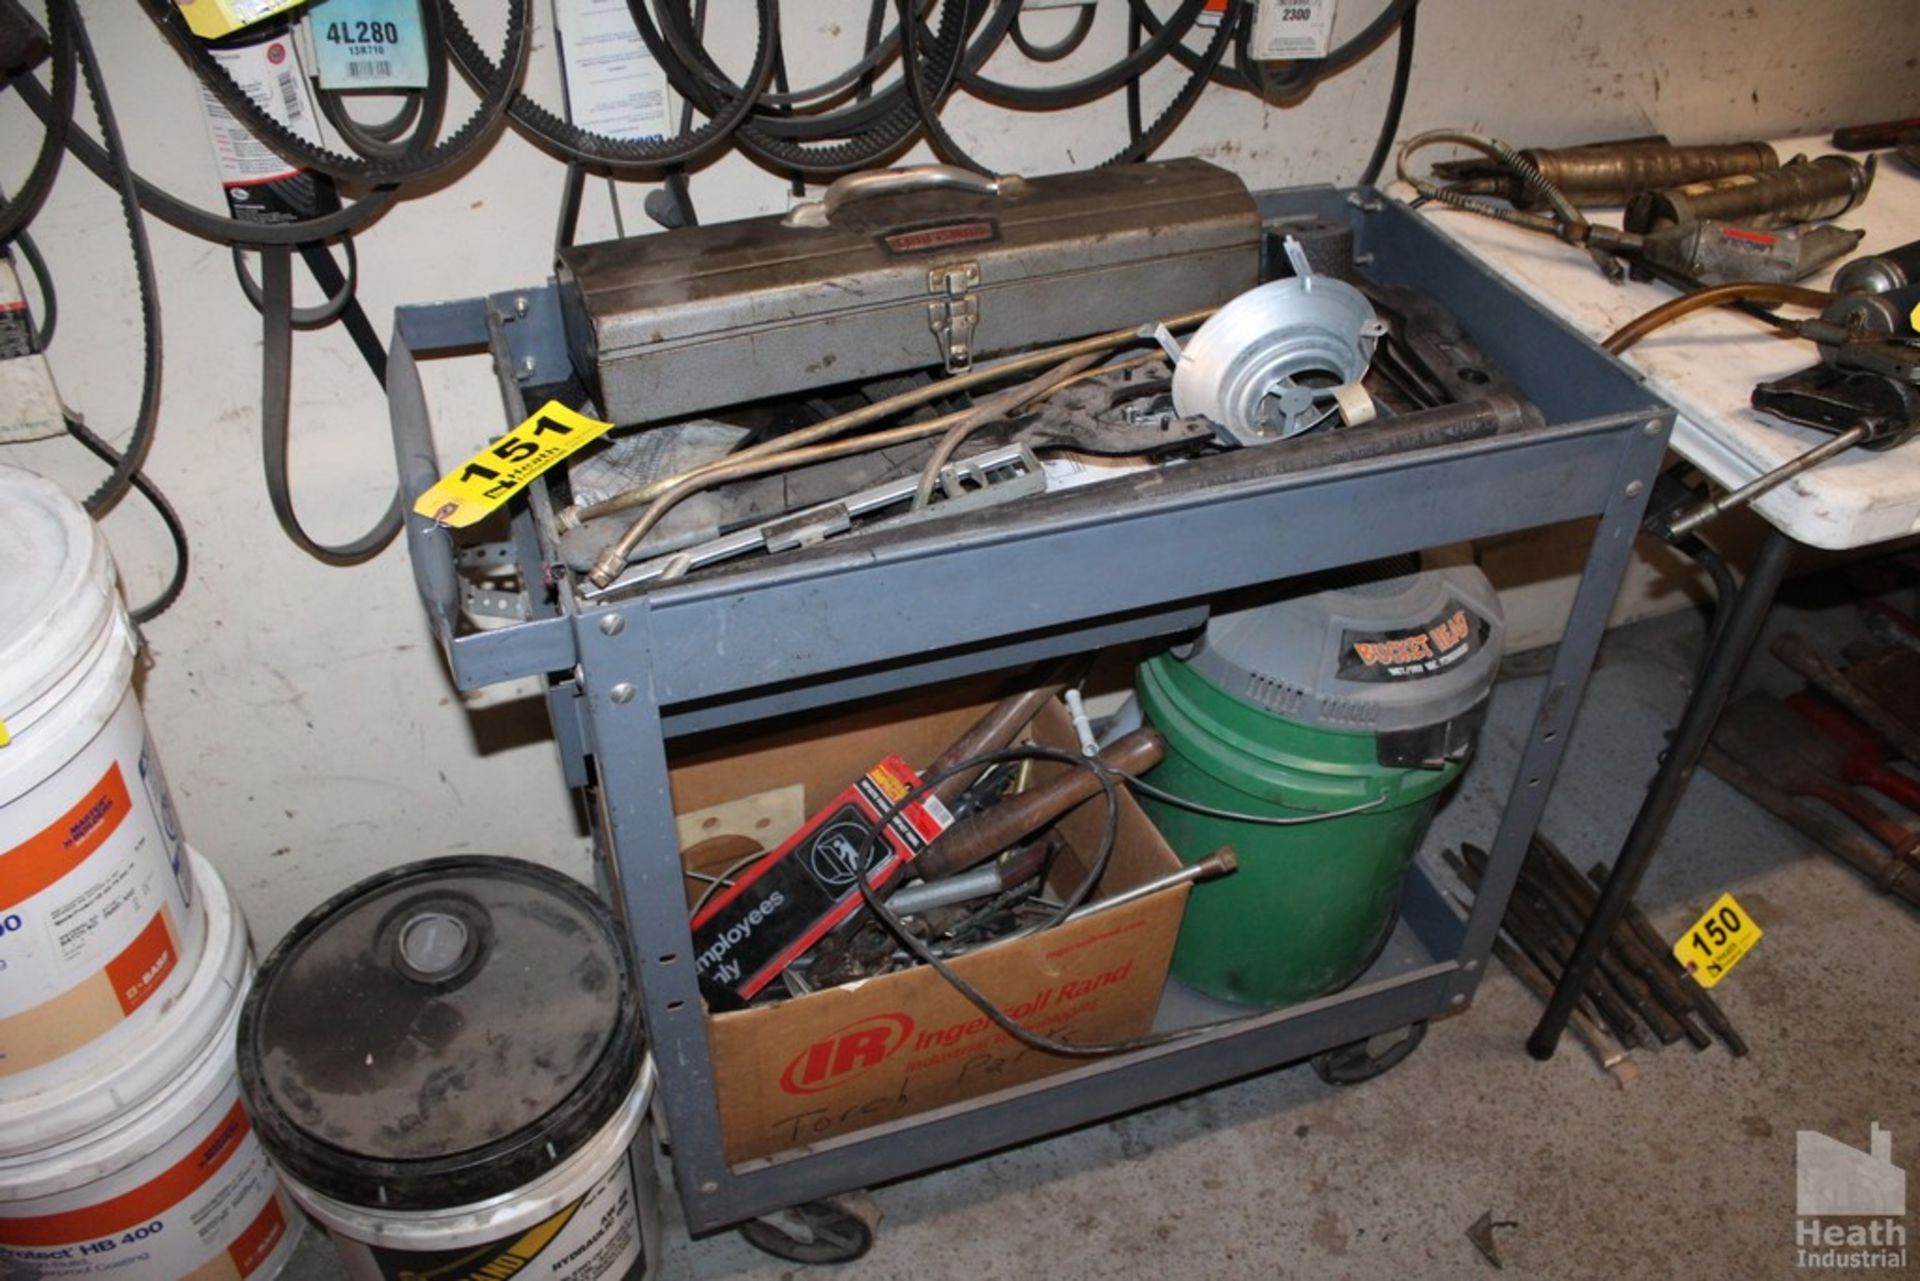 MISC. TOOLS AND PARTS ON SHOP CART